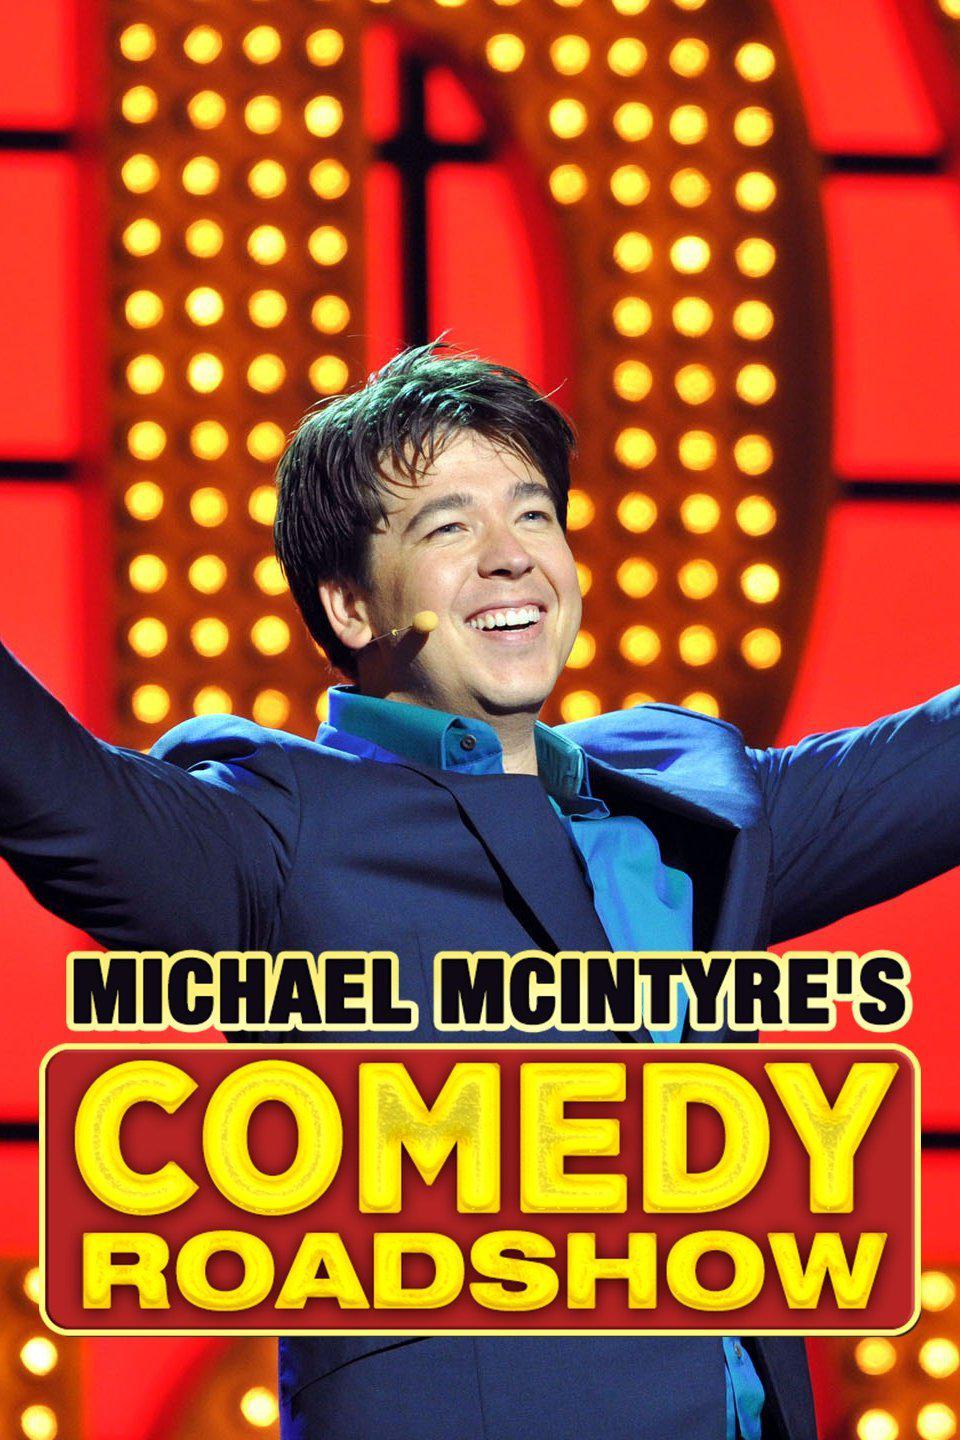 TV ratings for Michael Mcintyre's Comedy Roadshow in Países Bajos. BBC One TV series